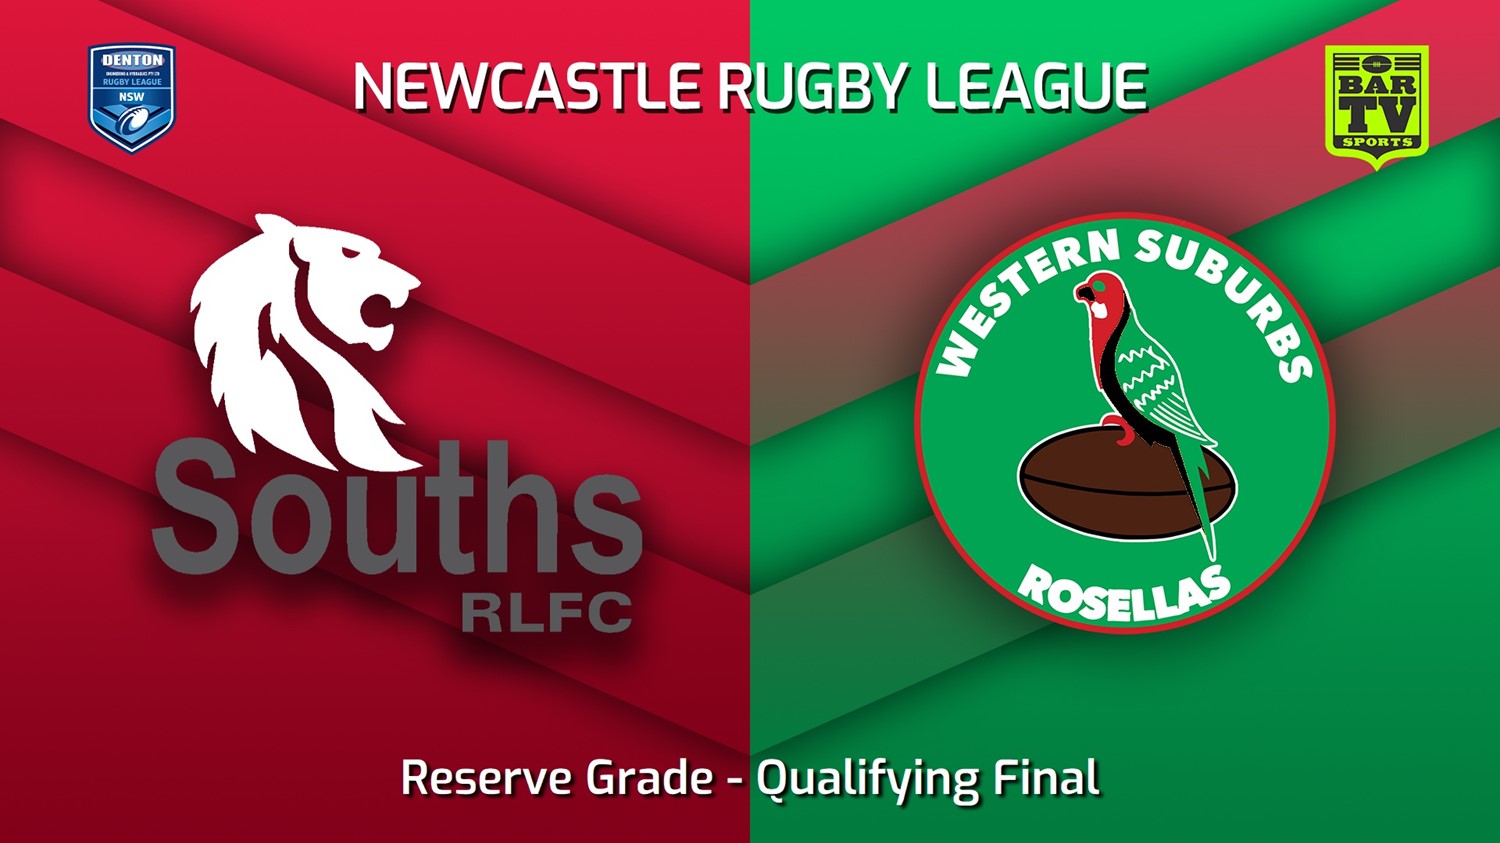 230812-Newcastle RL Qualifying Final - Reserve Grade - South Newcastle Lions v Western Suburbs Rosellas Slate Image